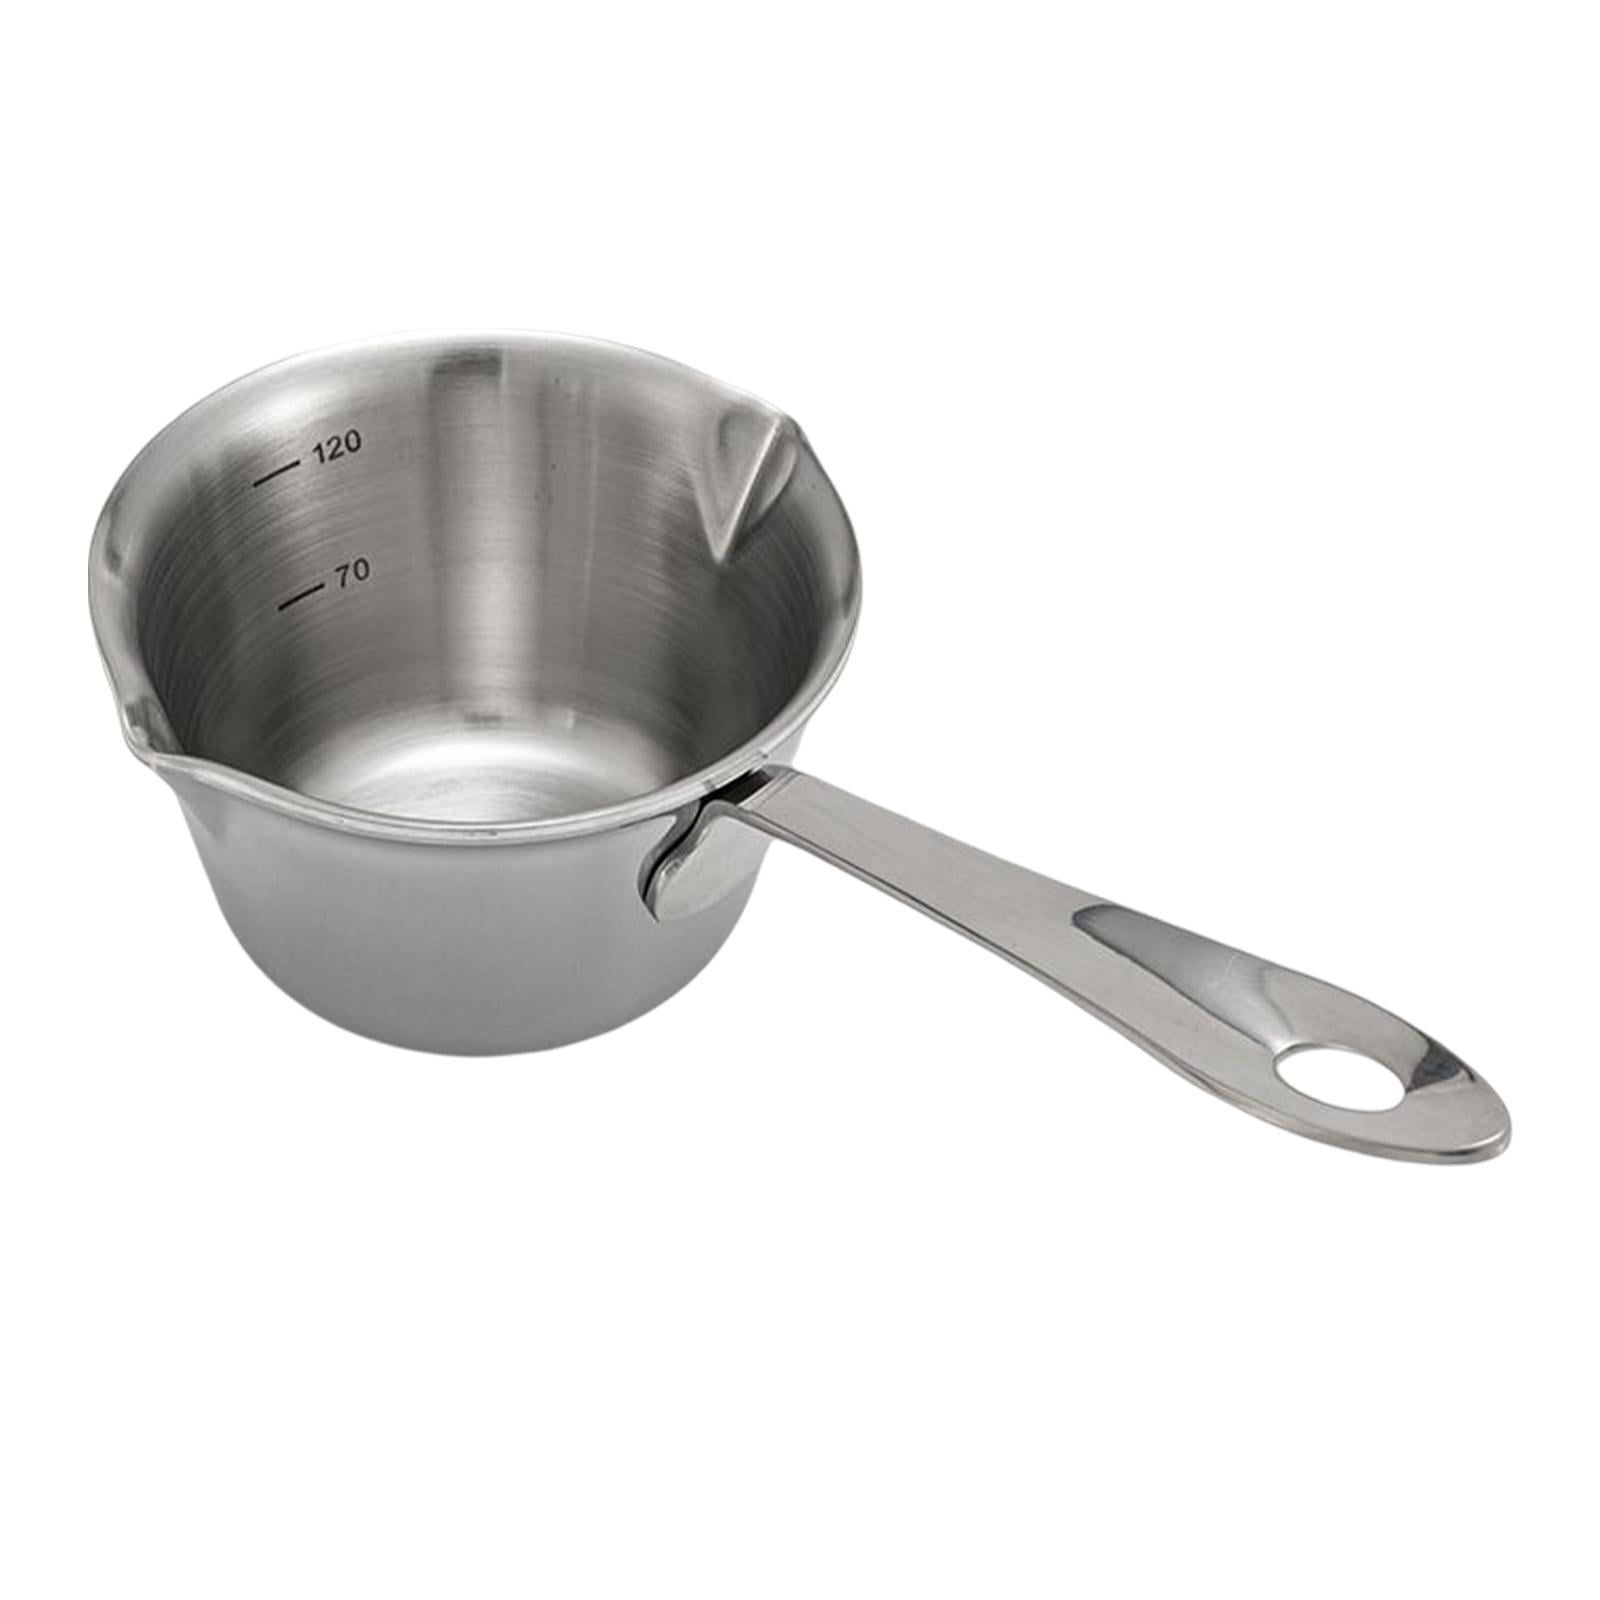 Home Basics 10 oz. Stainless Steel Mini Butter Melting Pot with Pour Spout, HYDRATION